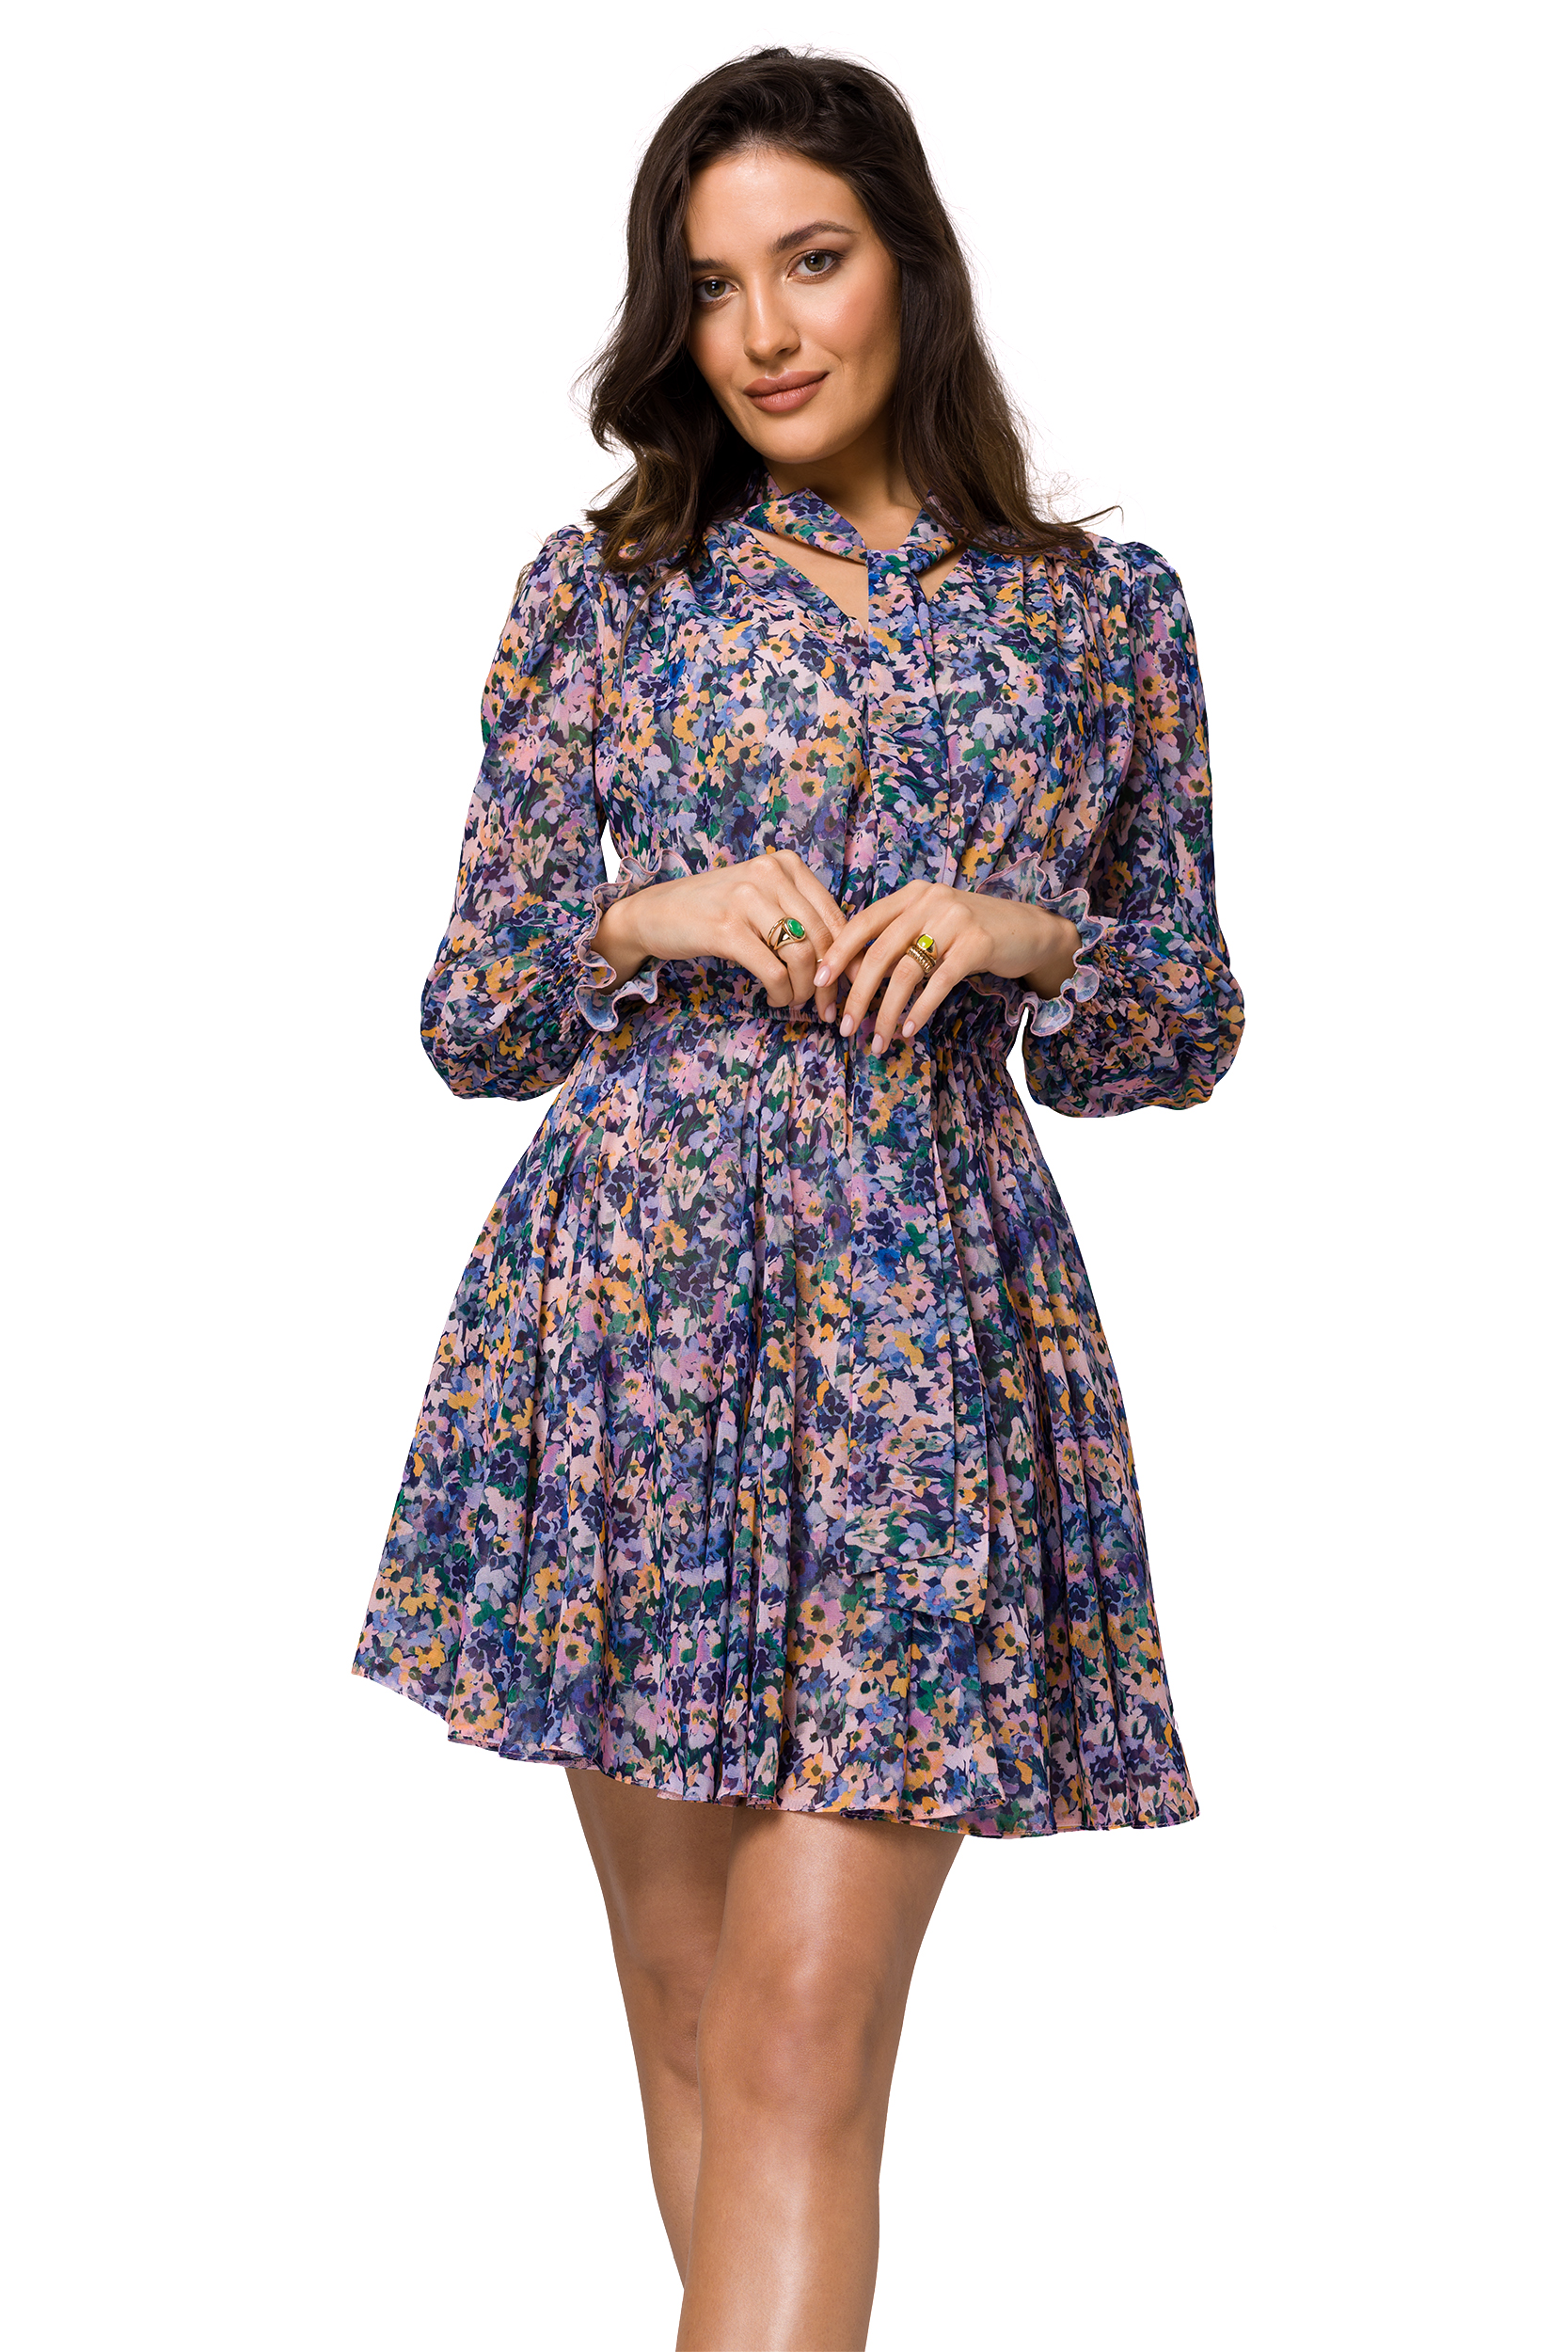 Woman modeling floral dress on white background